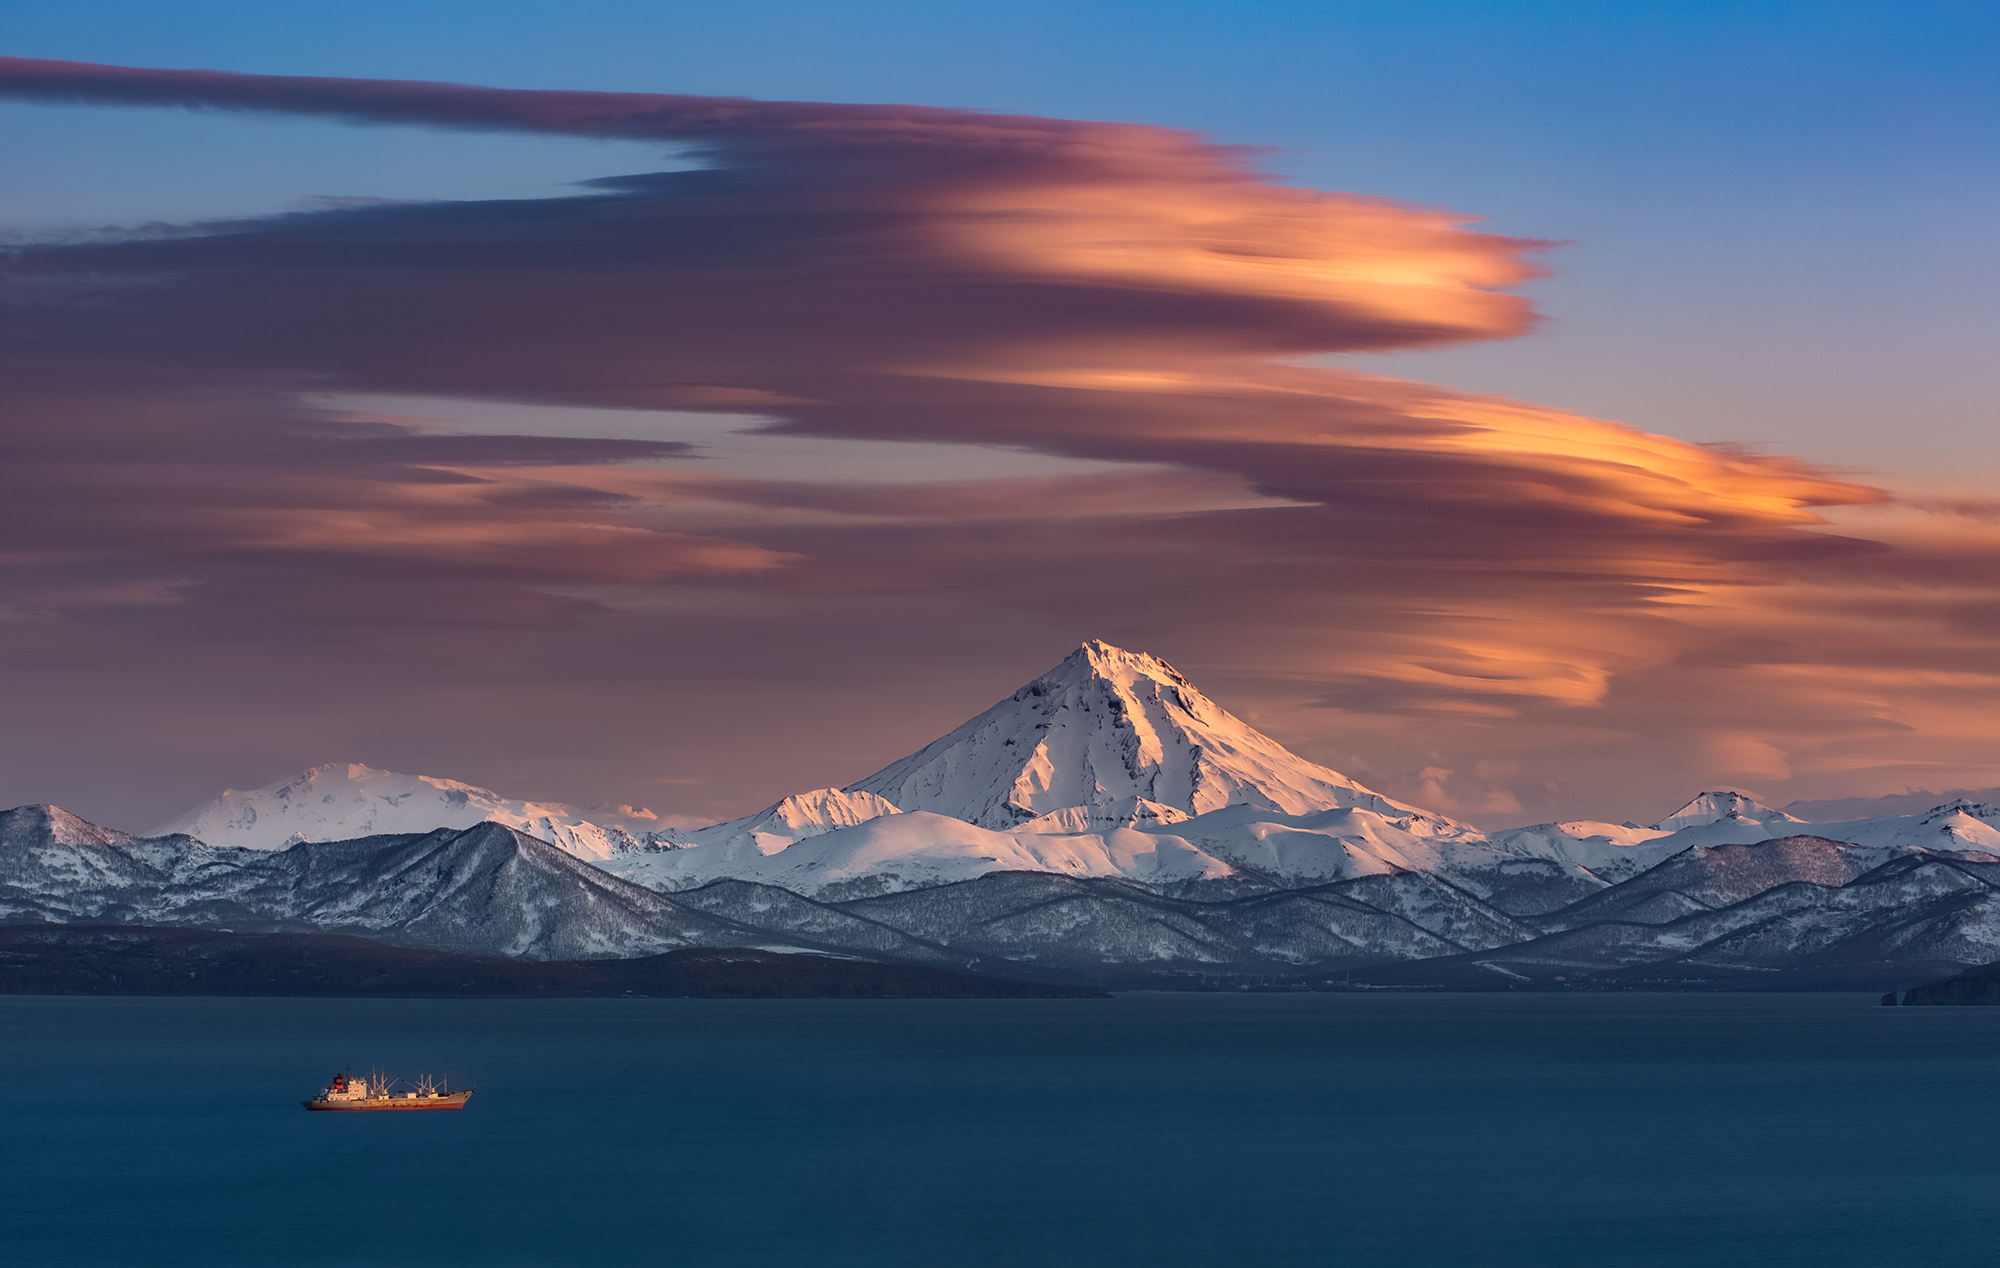 General 2000x1268 mountains snowy peak snow water sunset clouds nature sky reflection sunset glow mountain chain boat